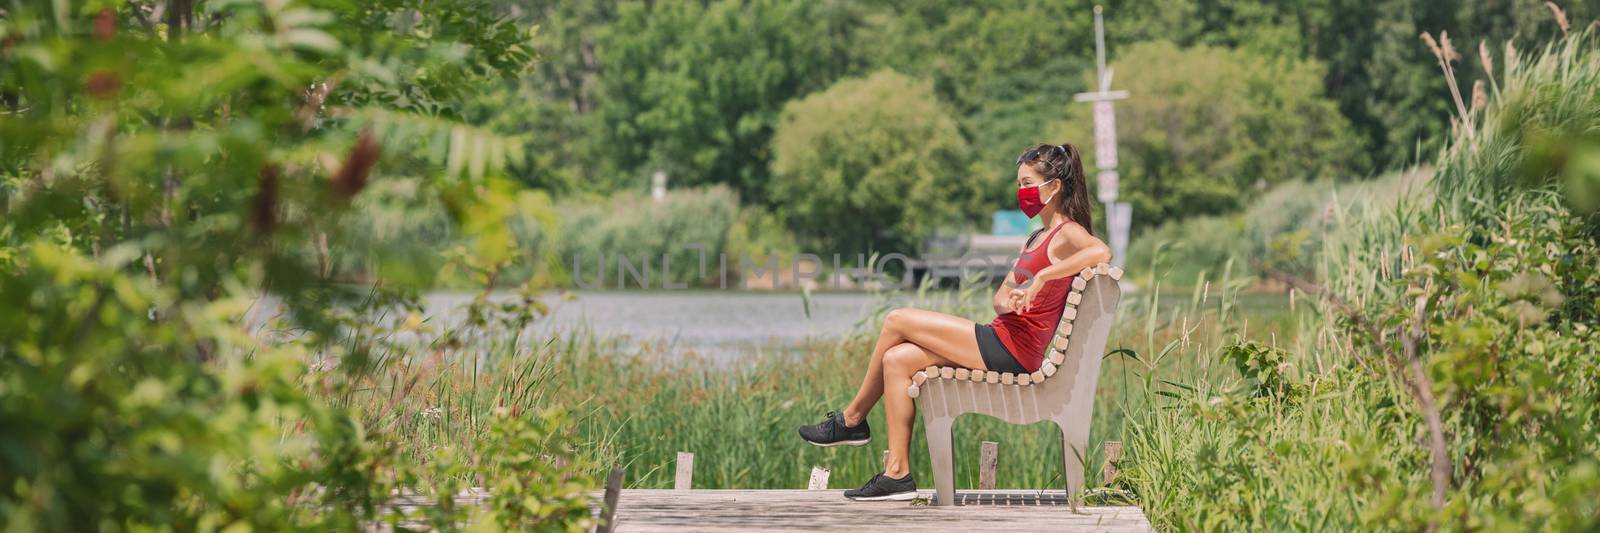 Mask wearing woman sitting relaxing on bench outside in summer nature park for coronavirus prevention. Protectve face covering COVID-19 lifestyle. Banner panoramic.